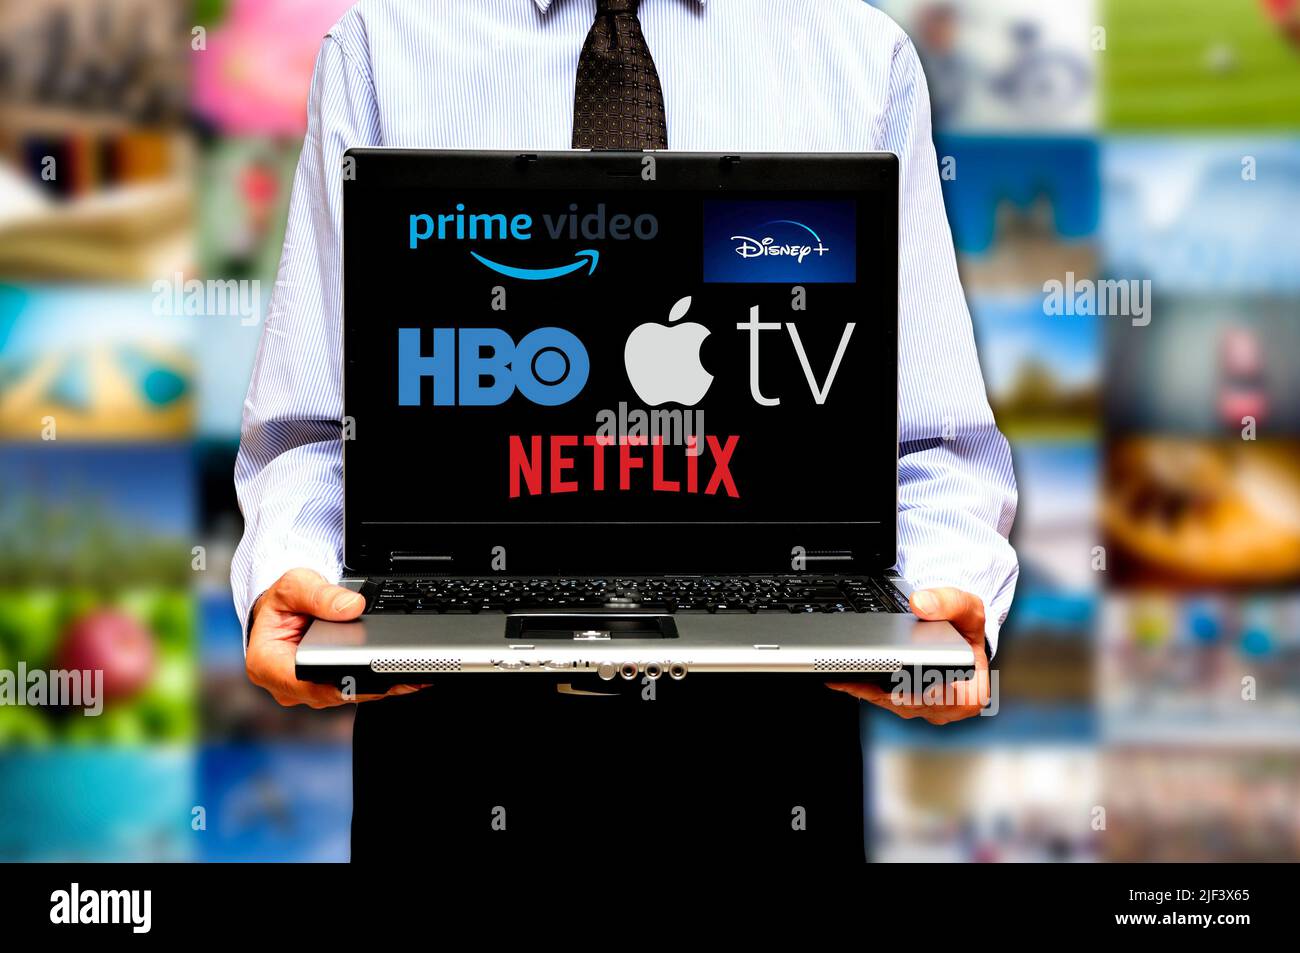 man with laptop and various streaming video services logo on screen Stock Photo